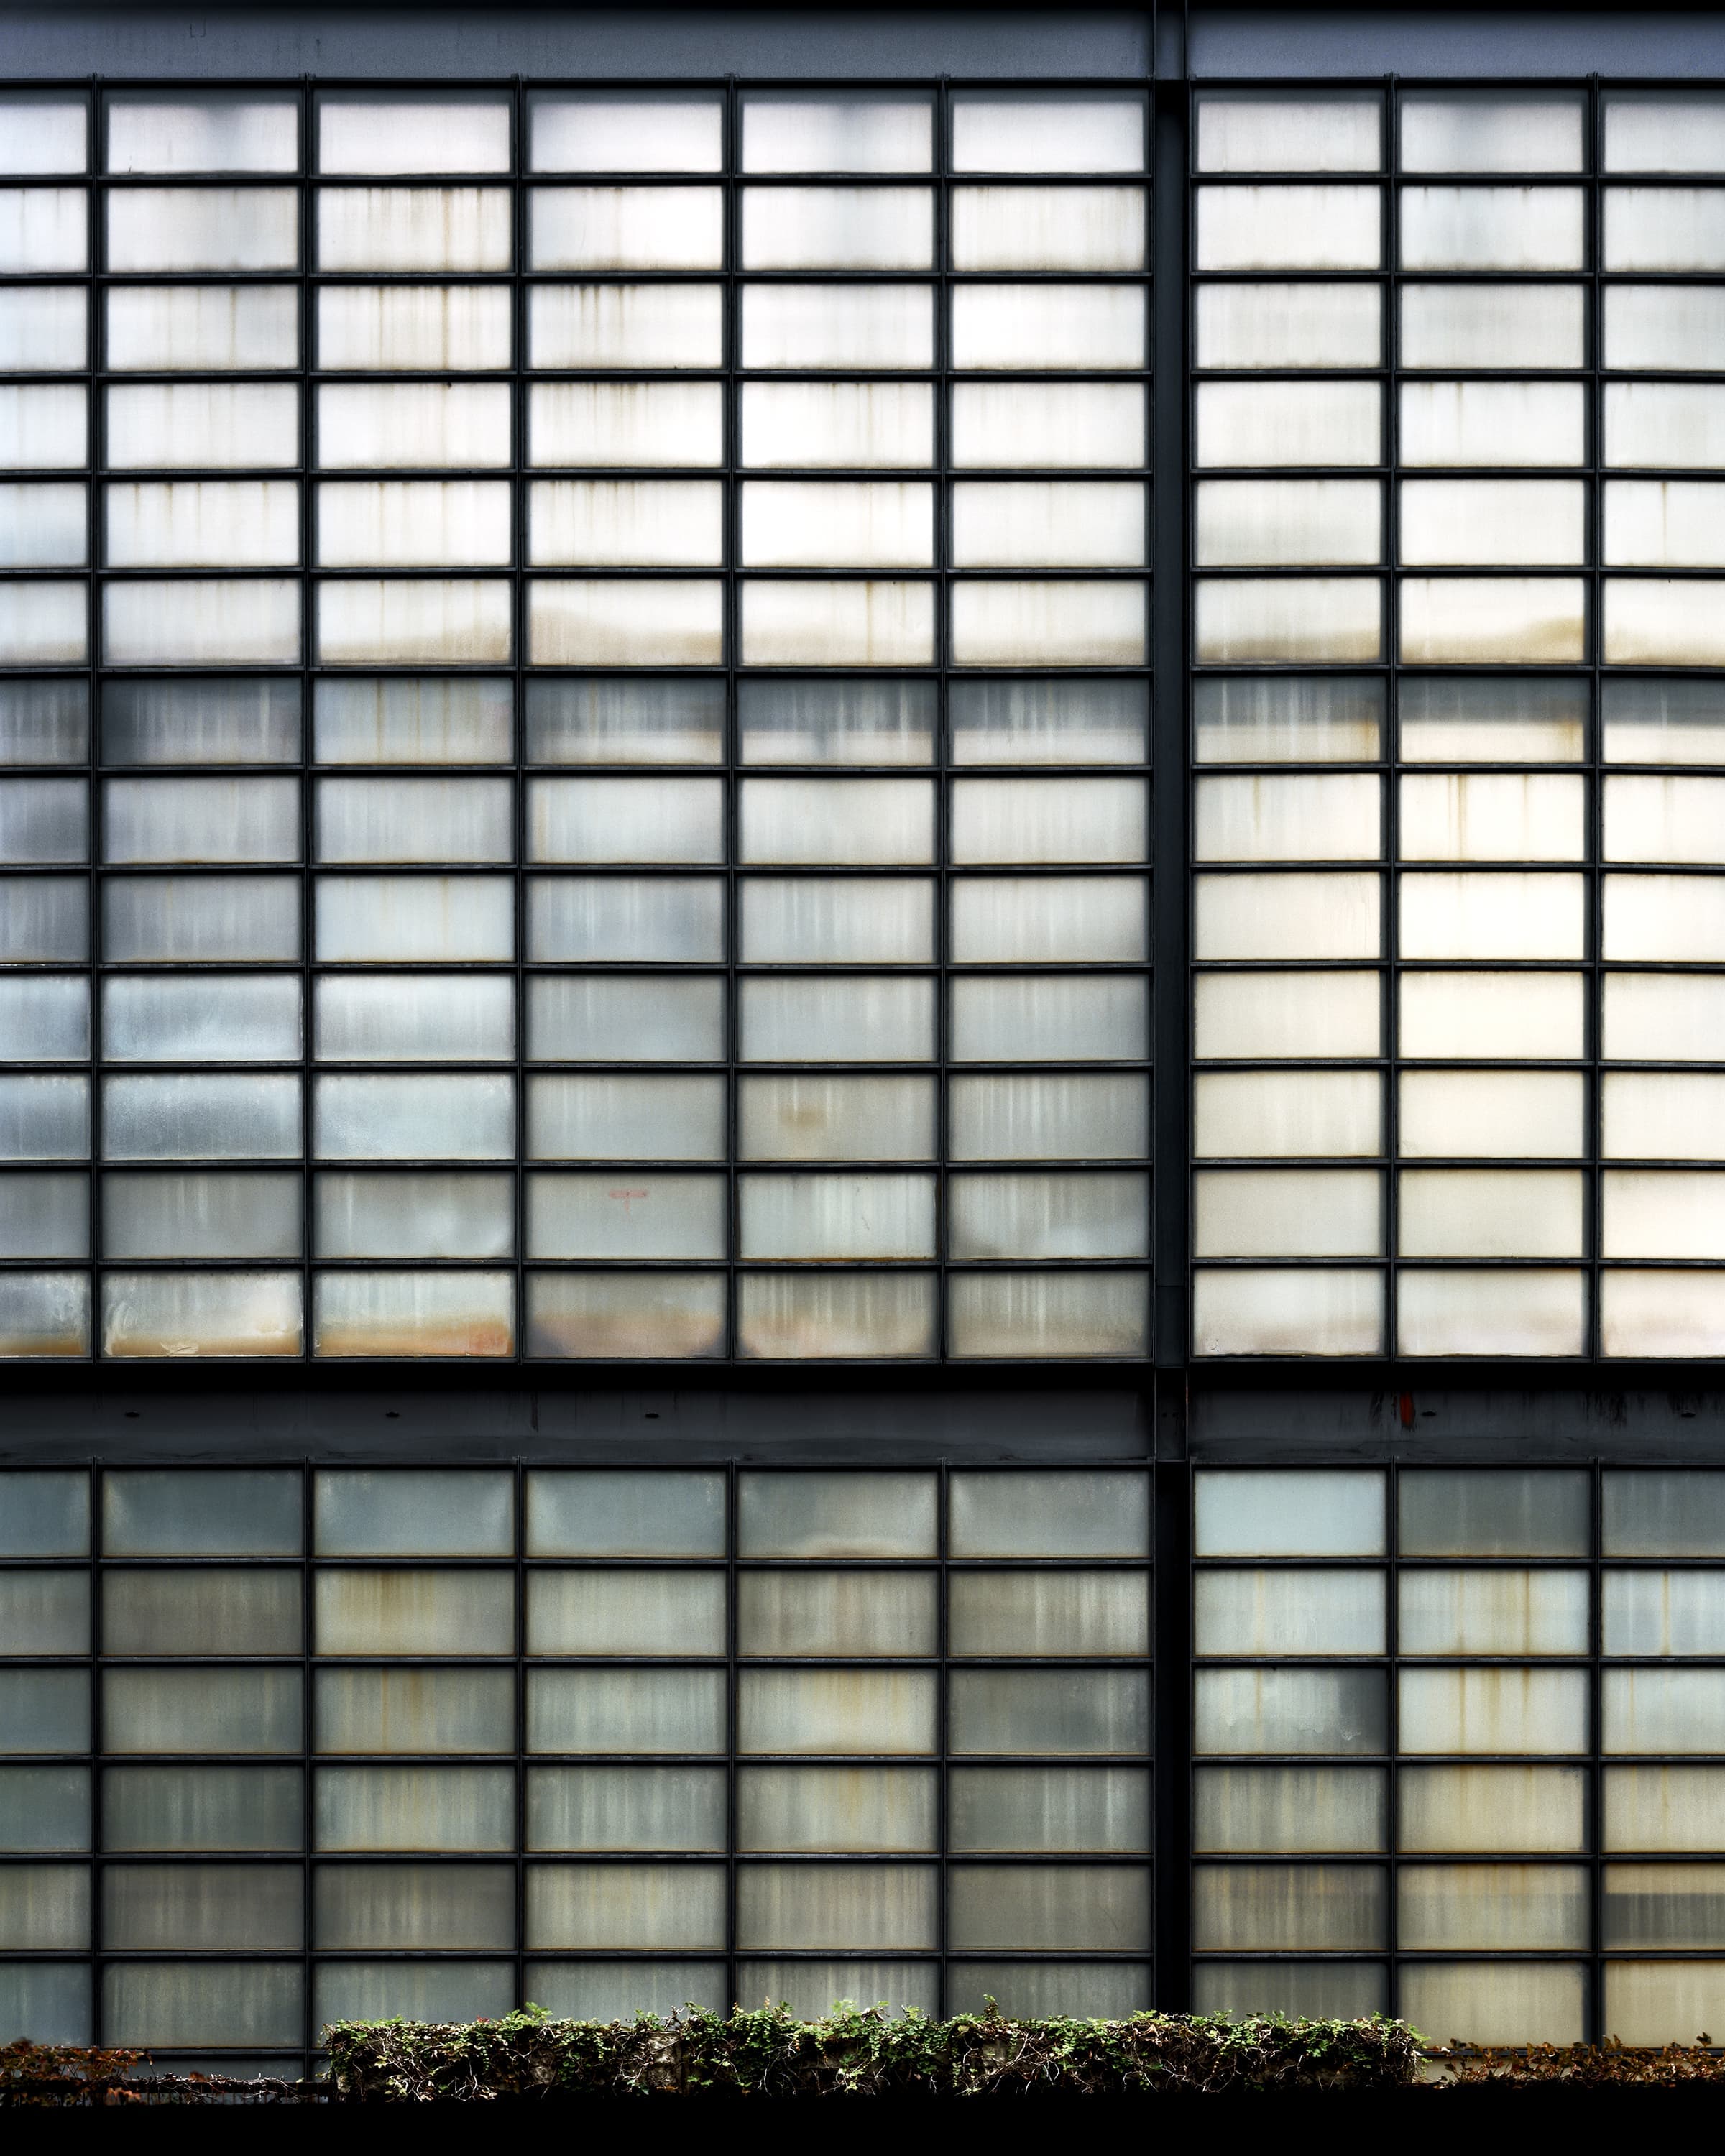 Fogged, tinted, and stained windows on a powerplant designed to look like a modernist building.